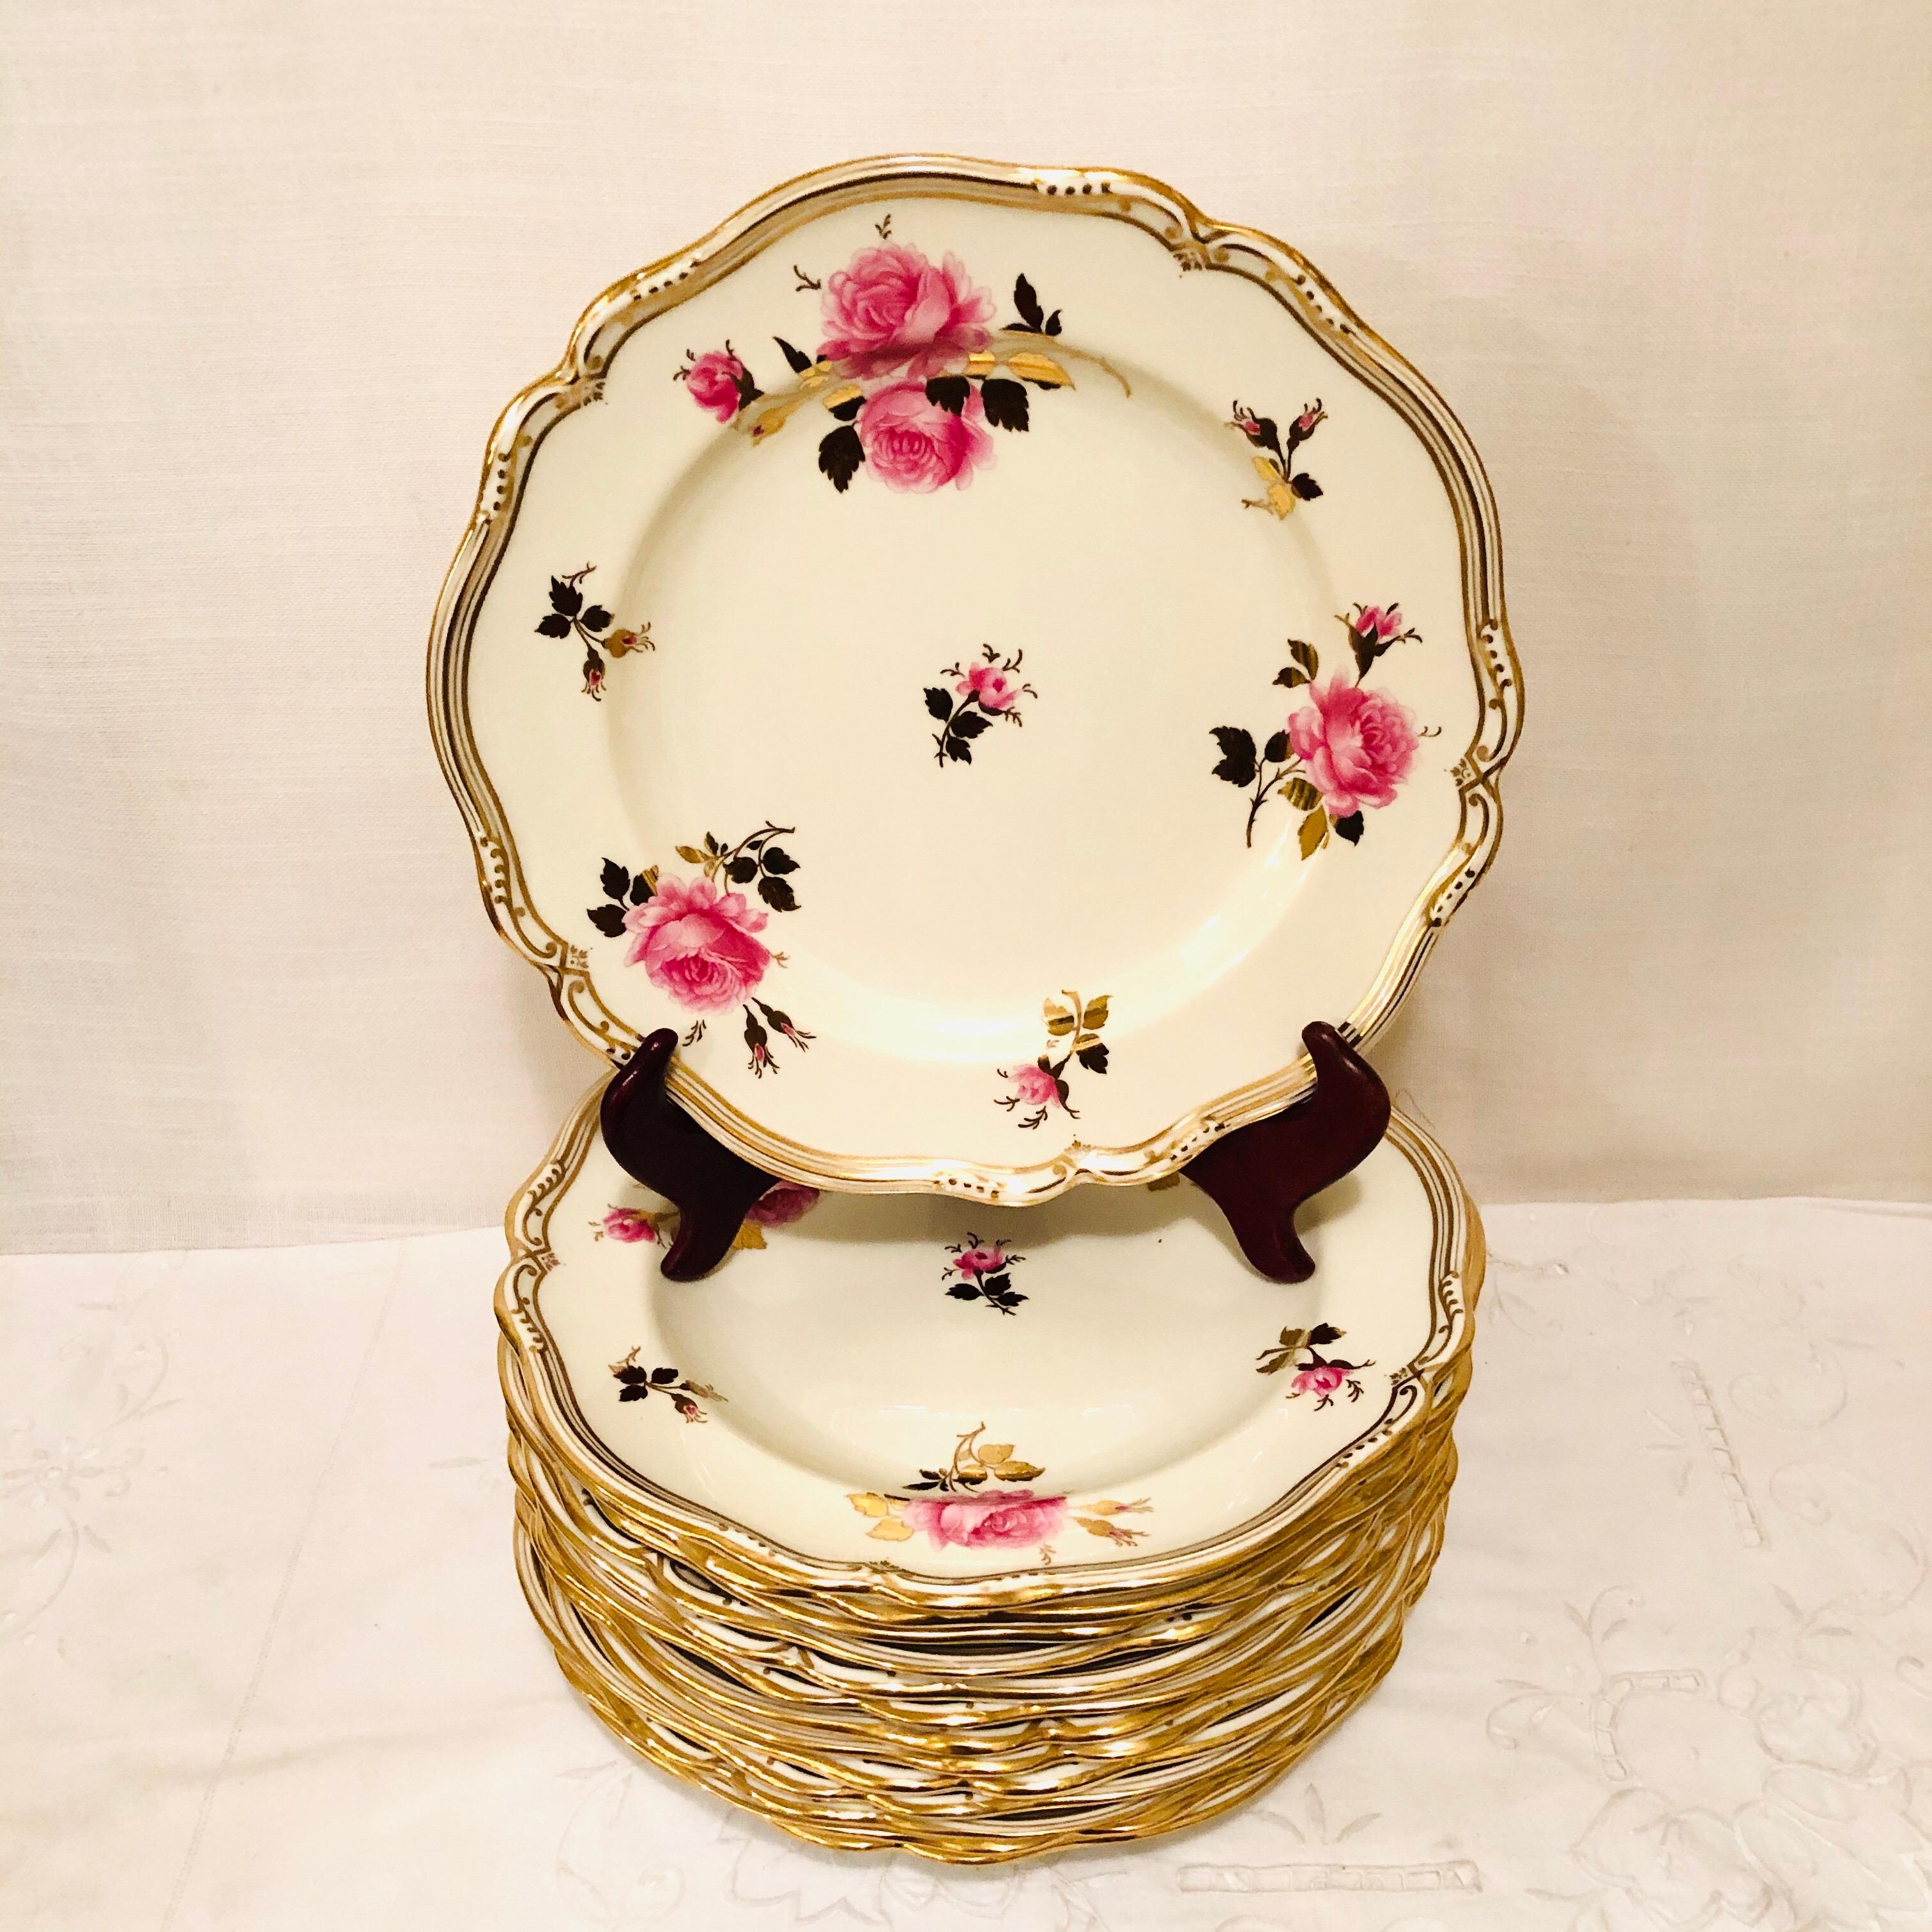 Spode Made for Tiffany 66 Piece Dinner Service Decorated with Large Pink Roses 2